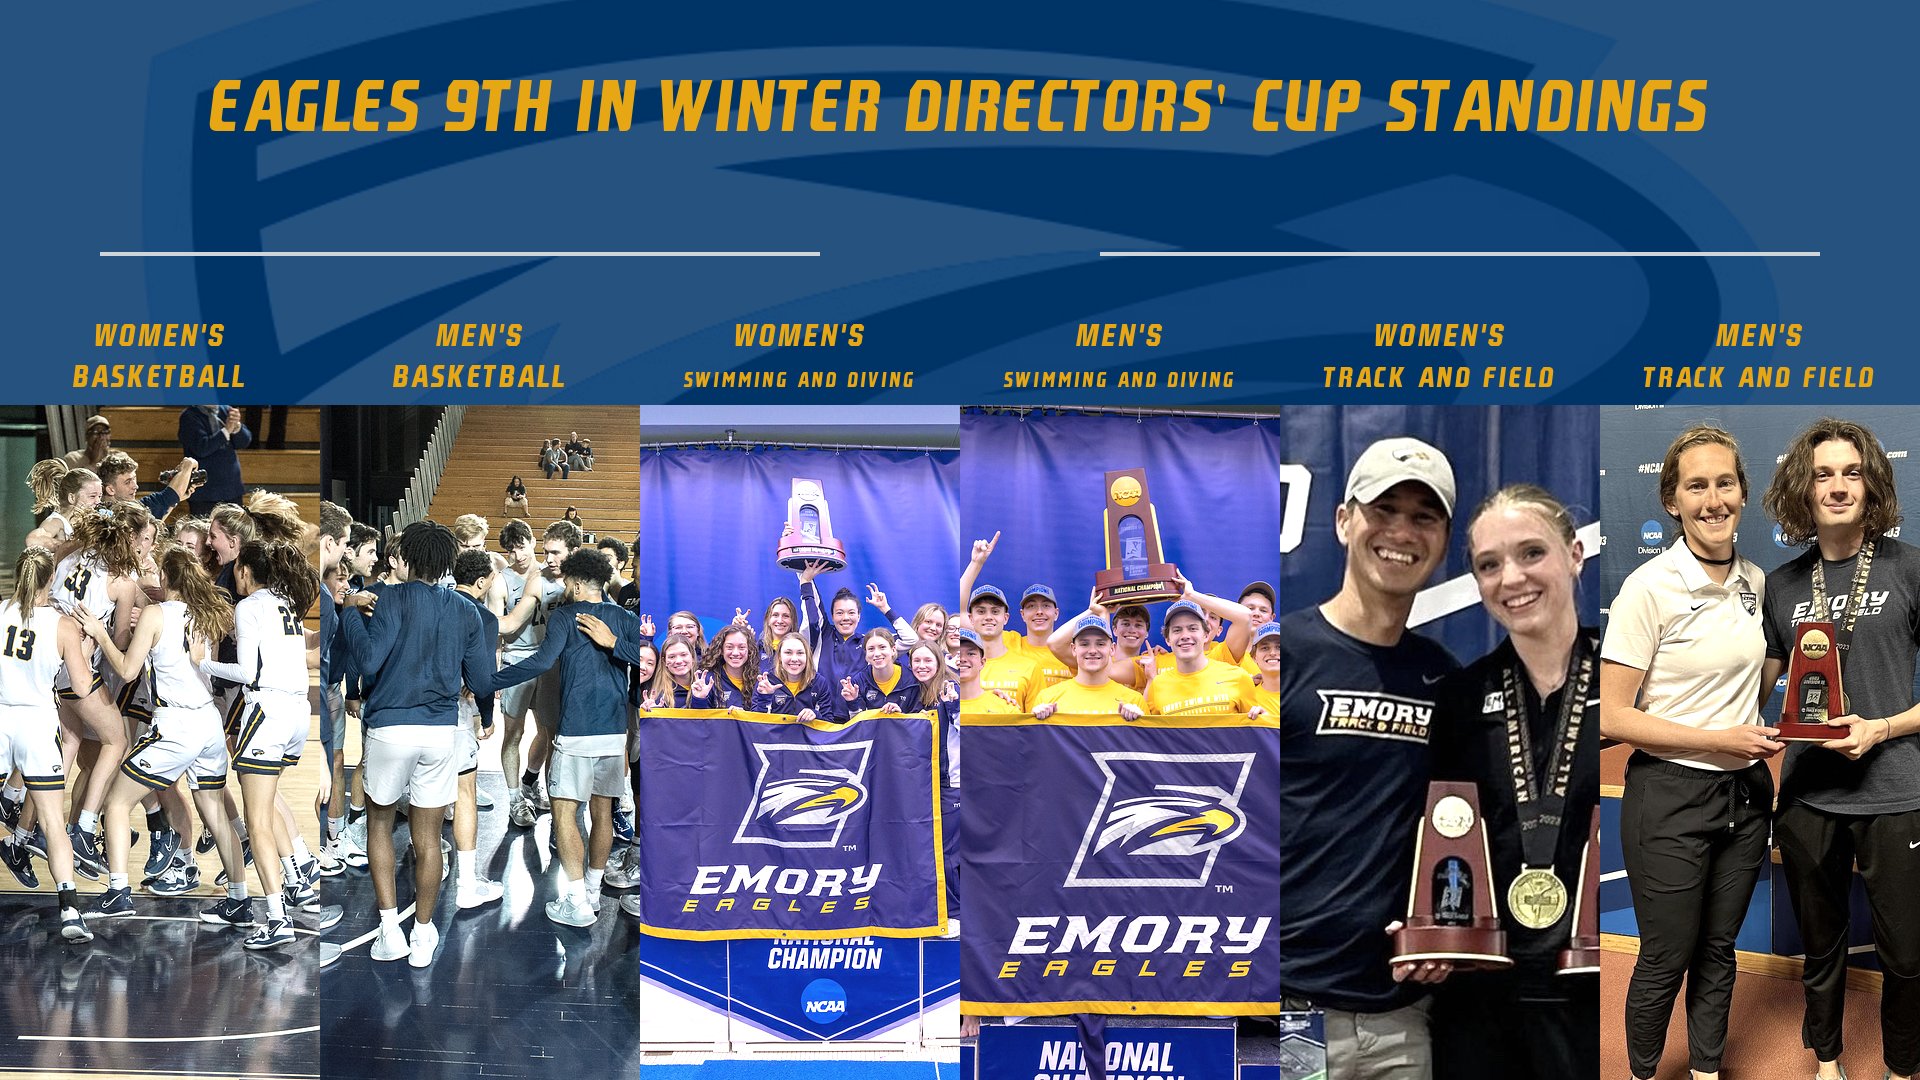 Eagles Stand Ninth in LEARFIELD Directors' Cup Following Winter Season